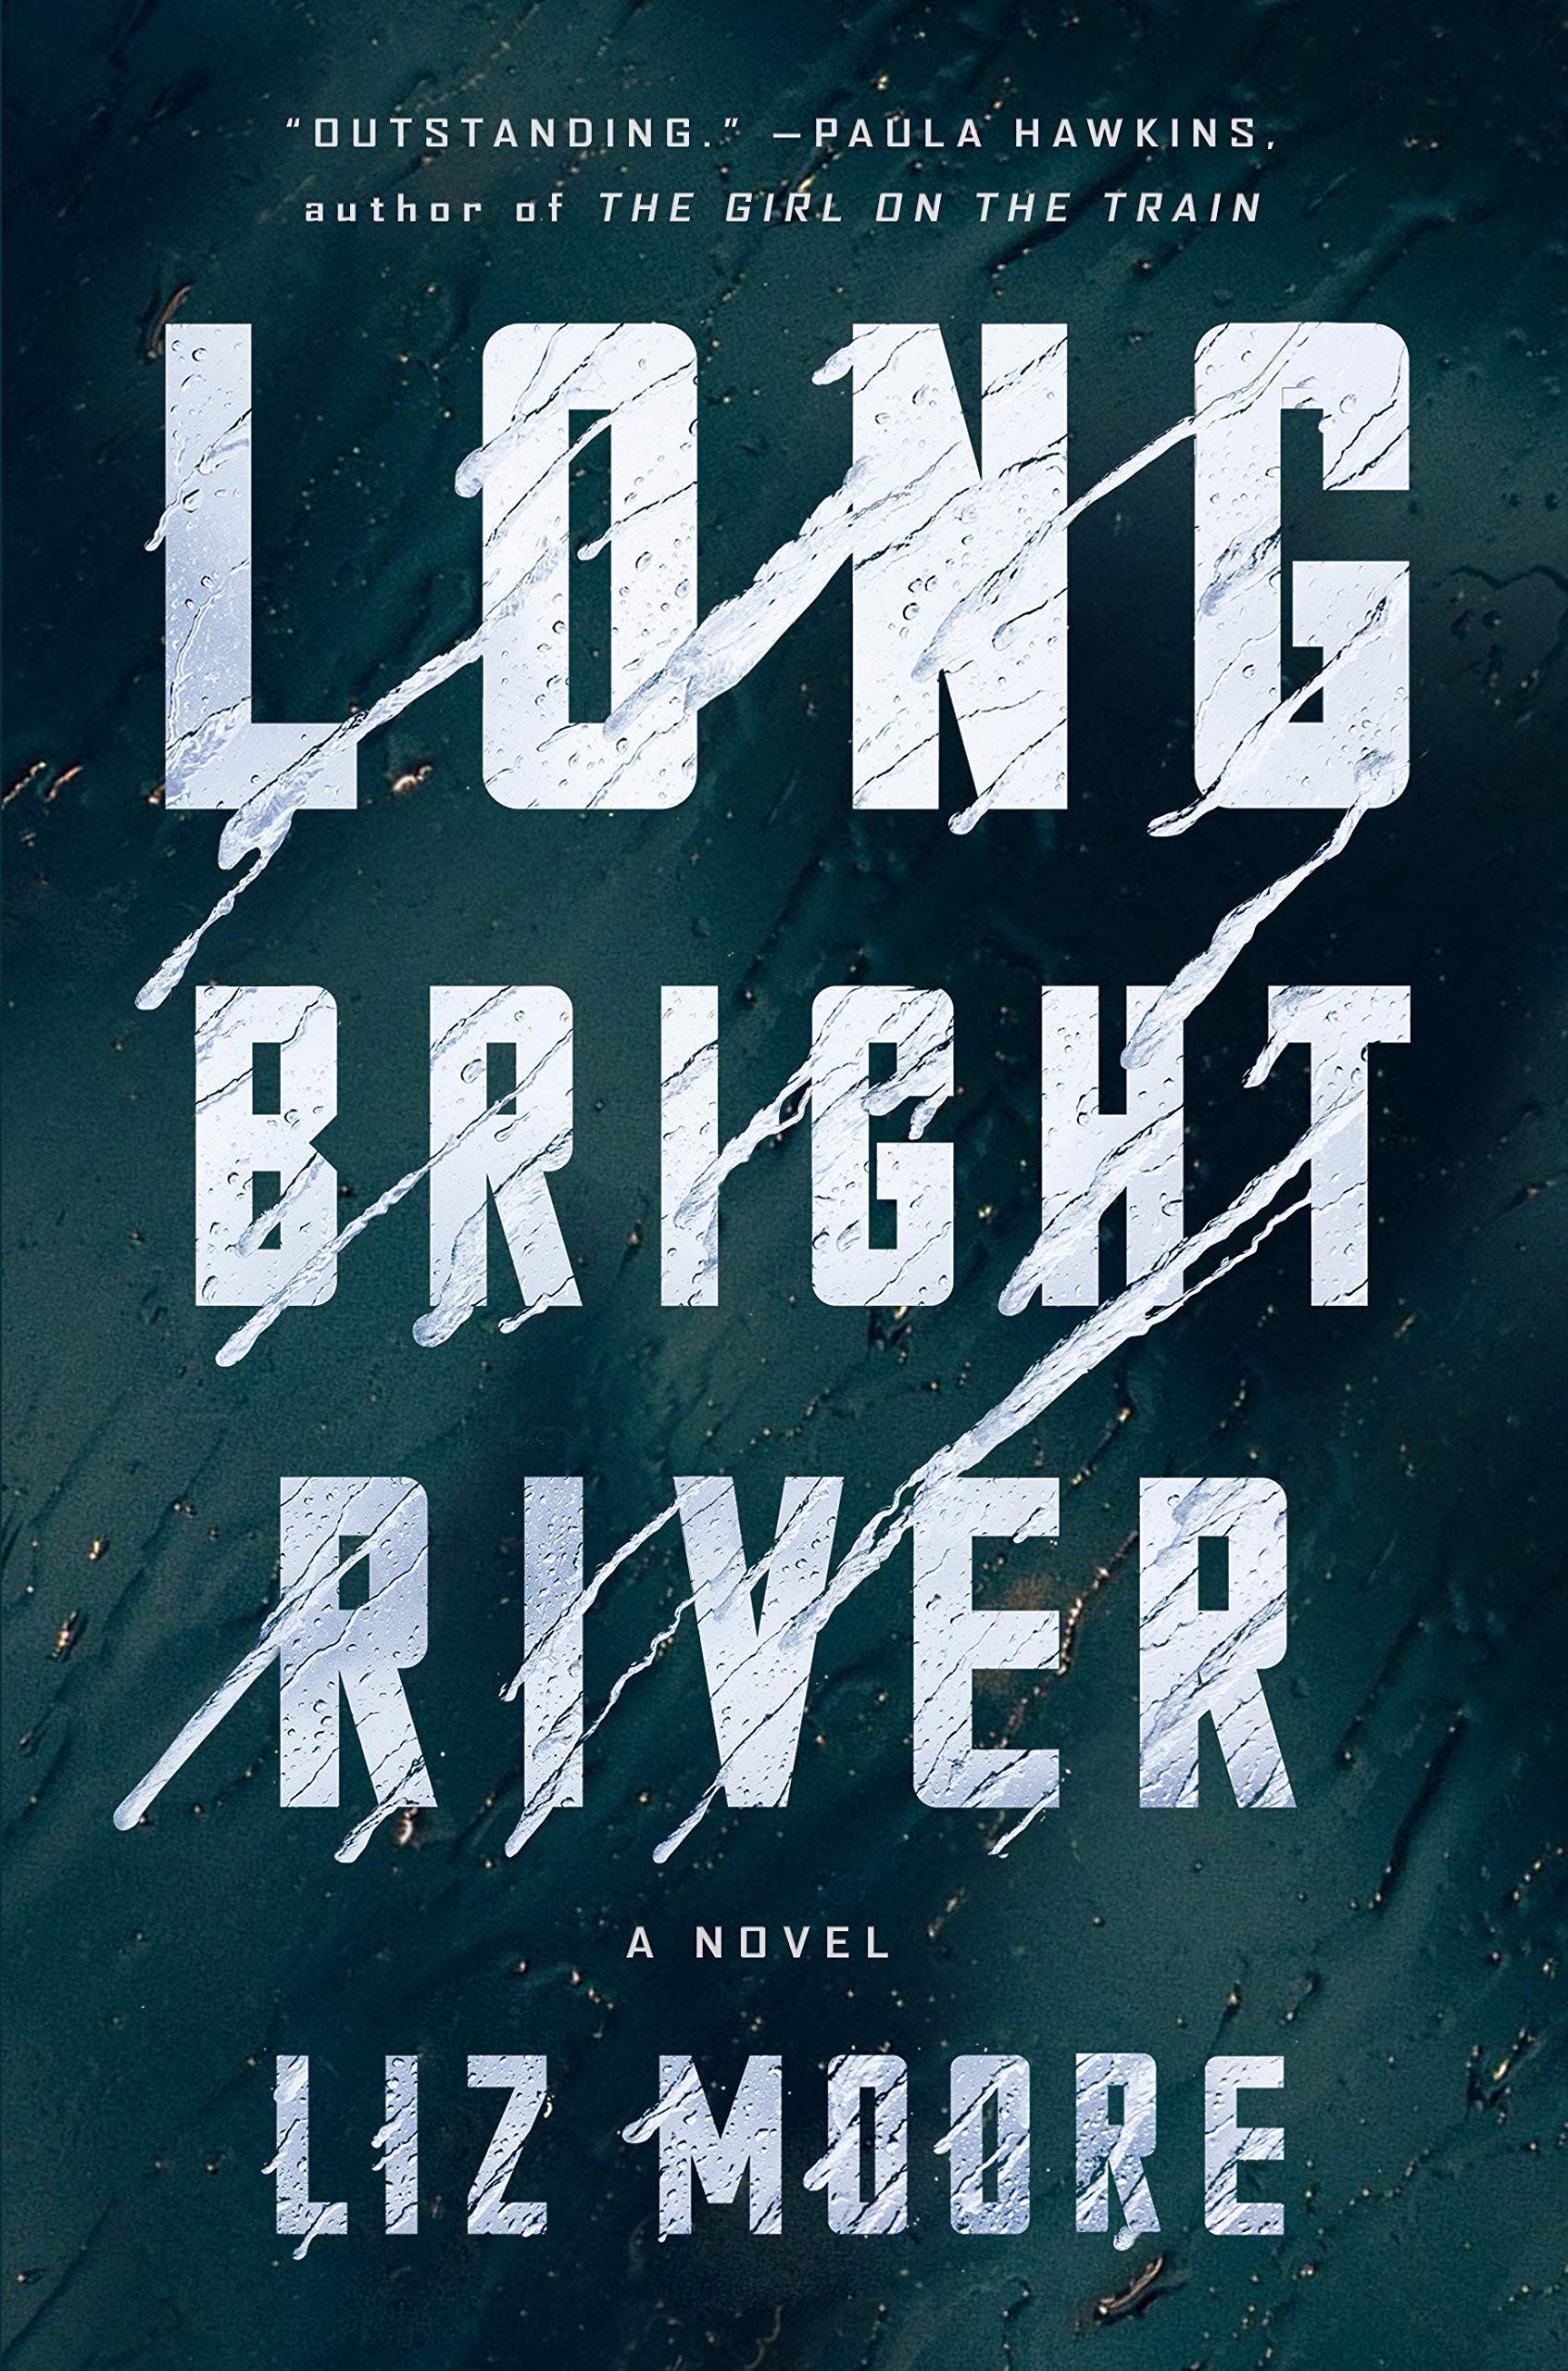 Long Bright River 2020 book releases